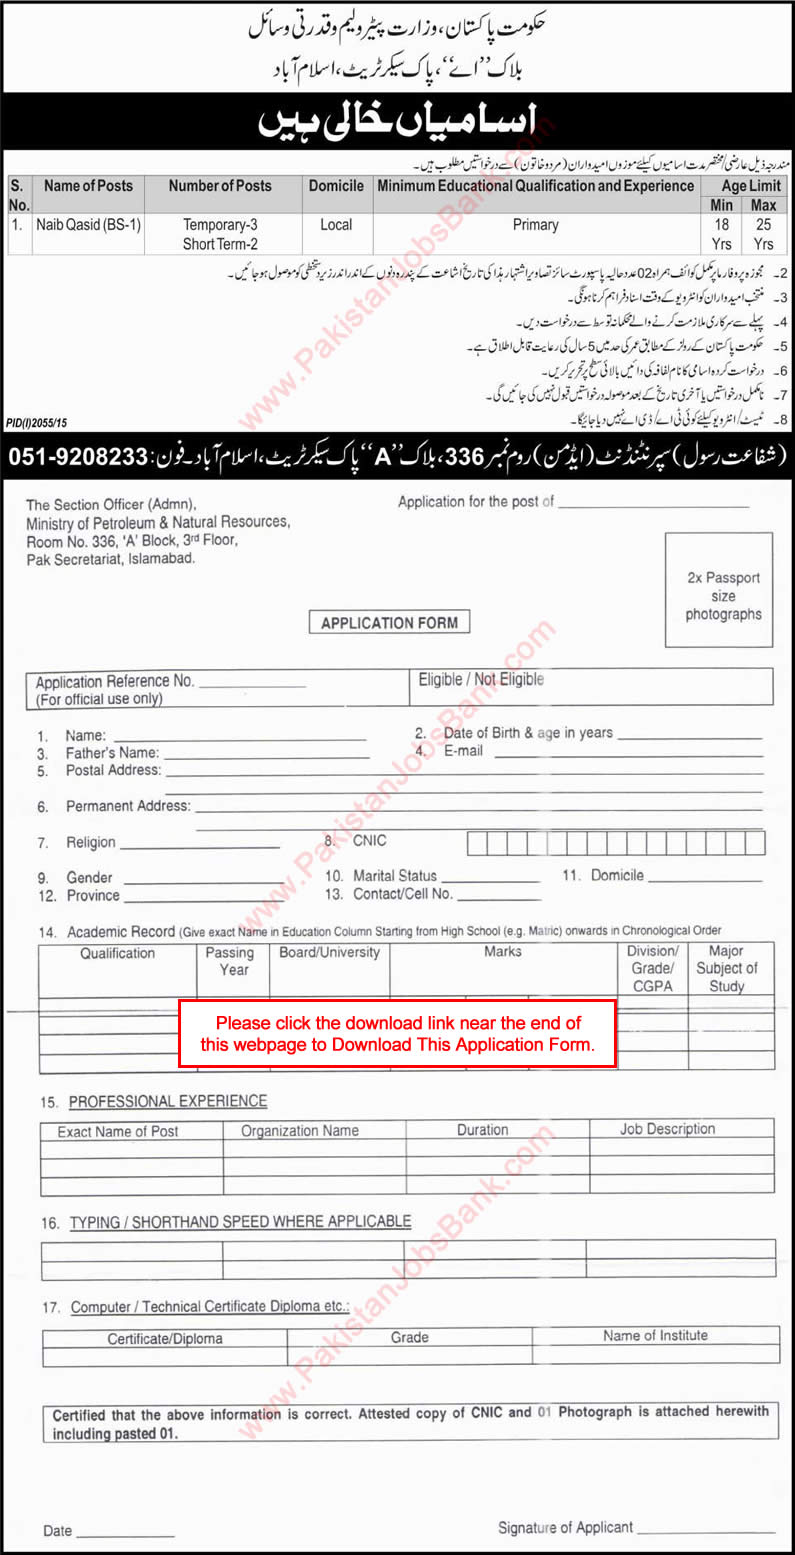 Naib Qasid Jobs in Ministry of Petroleum and Natural Resources Islamabad 2015 October Application Form